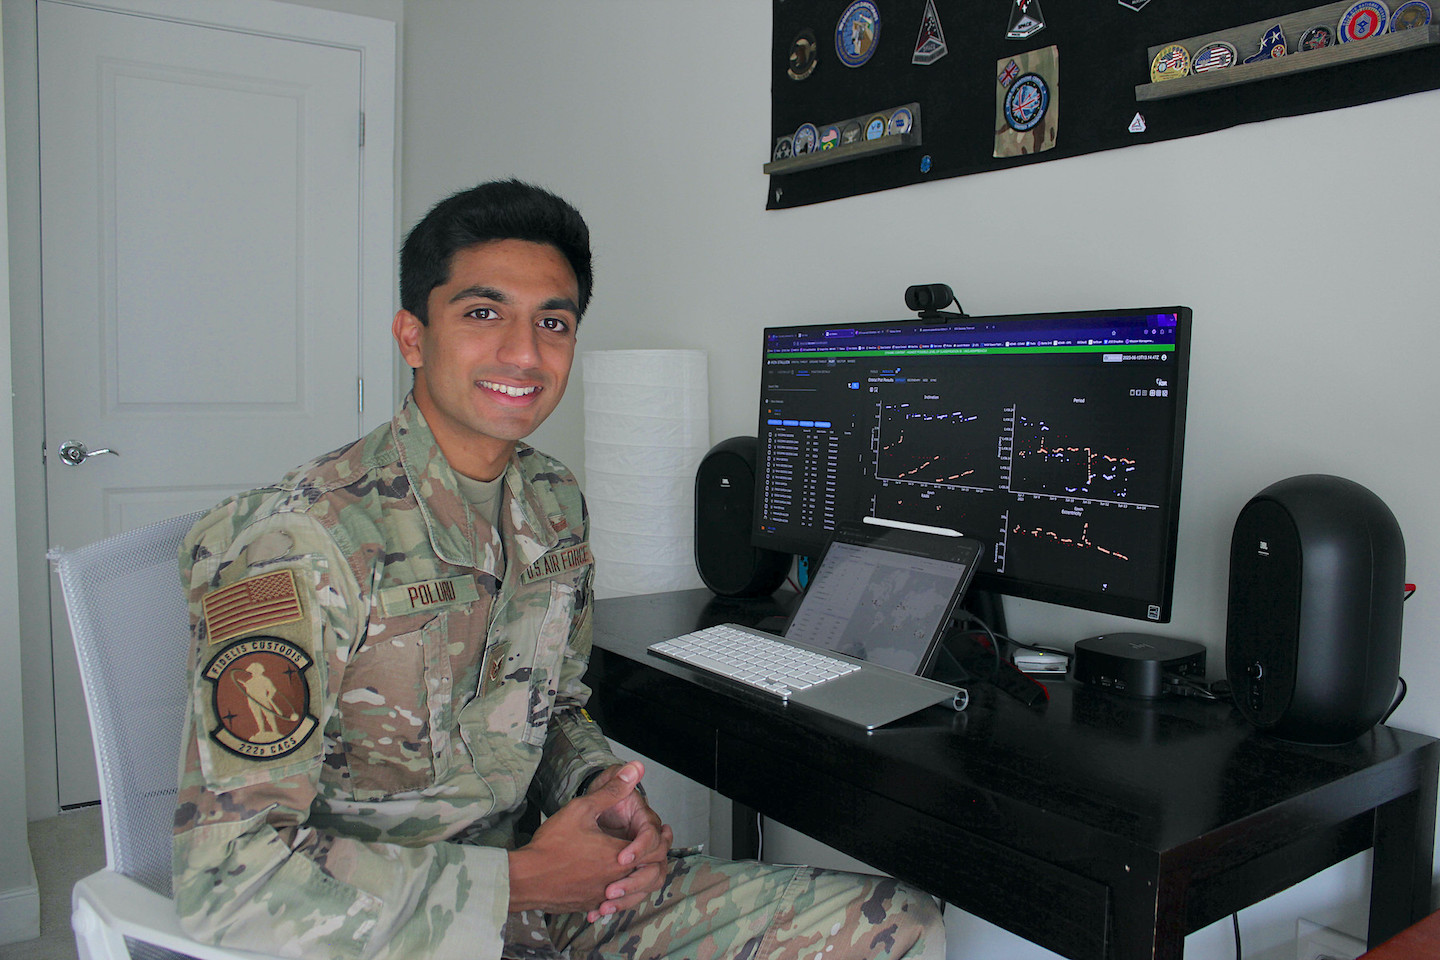 New York Air National Guard Staff Sgt. Dhruva Poluru, a member of the 107th Attack Wing's 222nd Command and Control Squadron, seen here at his home office in Chantilly, Virginia, on June 12, was named the Airman of the Year for the 500,000-member total Air Force. Poluru serves as a full-time Guard Airman assigned to the National Reconnaissance Office. (U.S. Air National Guard photo by 1st Lt. Jason Carr)